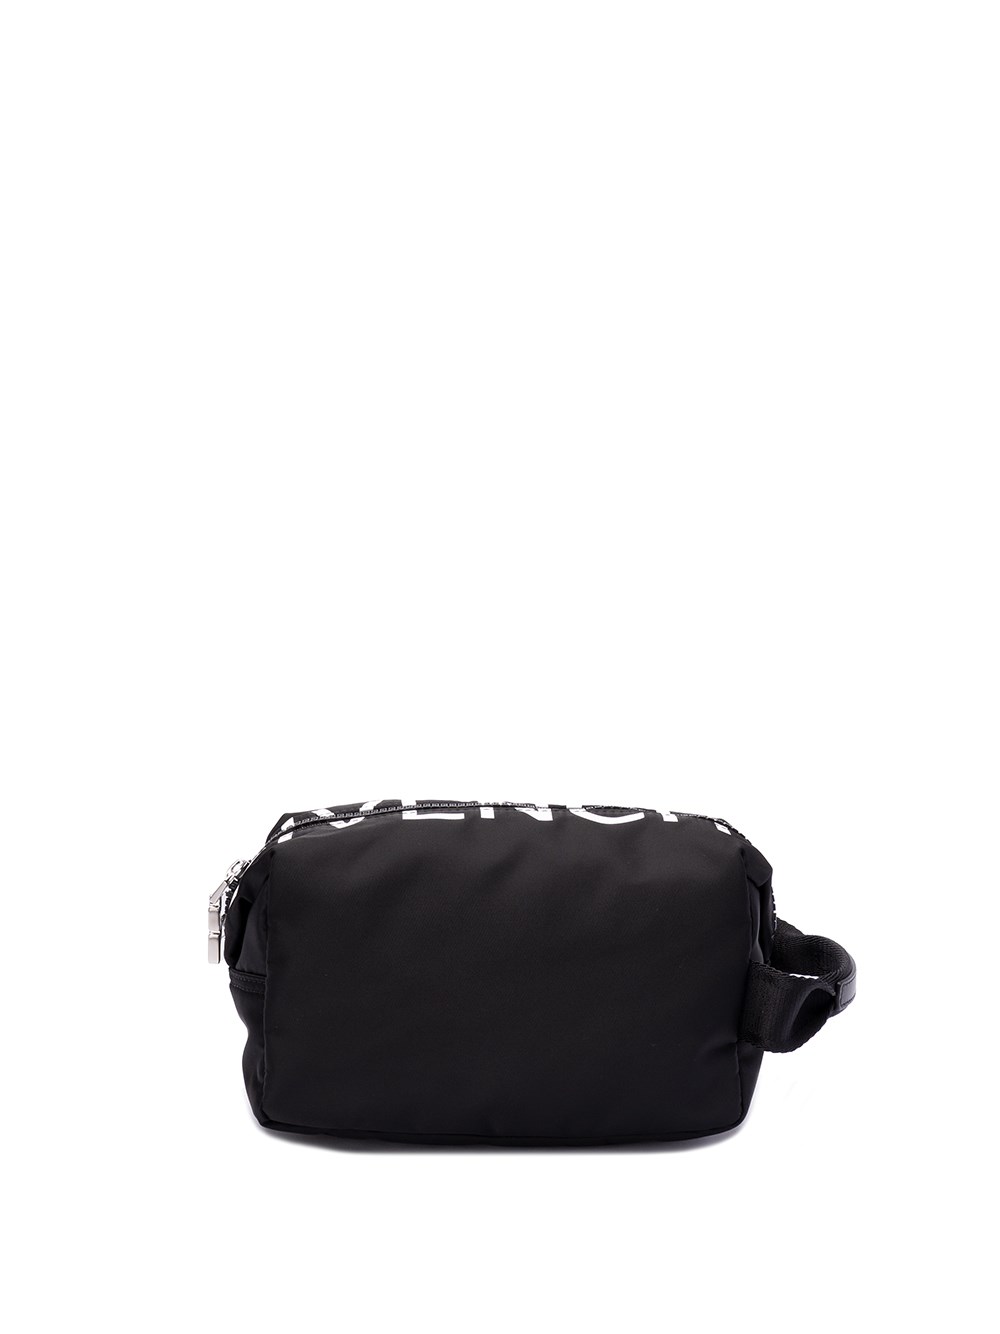 Givenchy `g-zip` Toilet Pouch In Black  